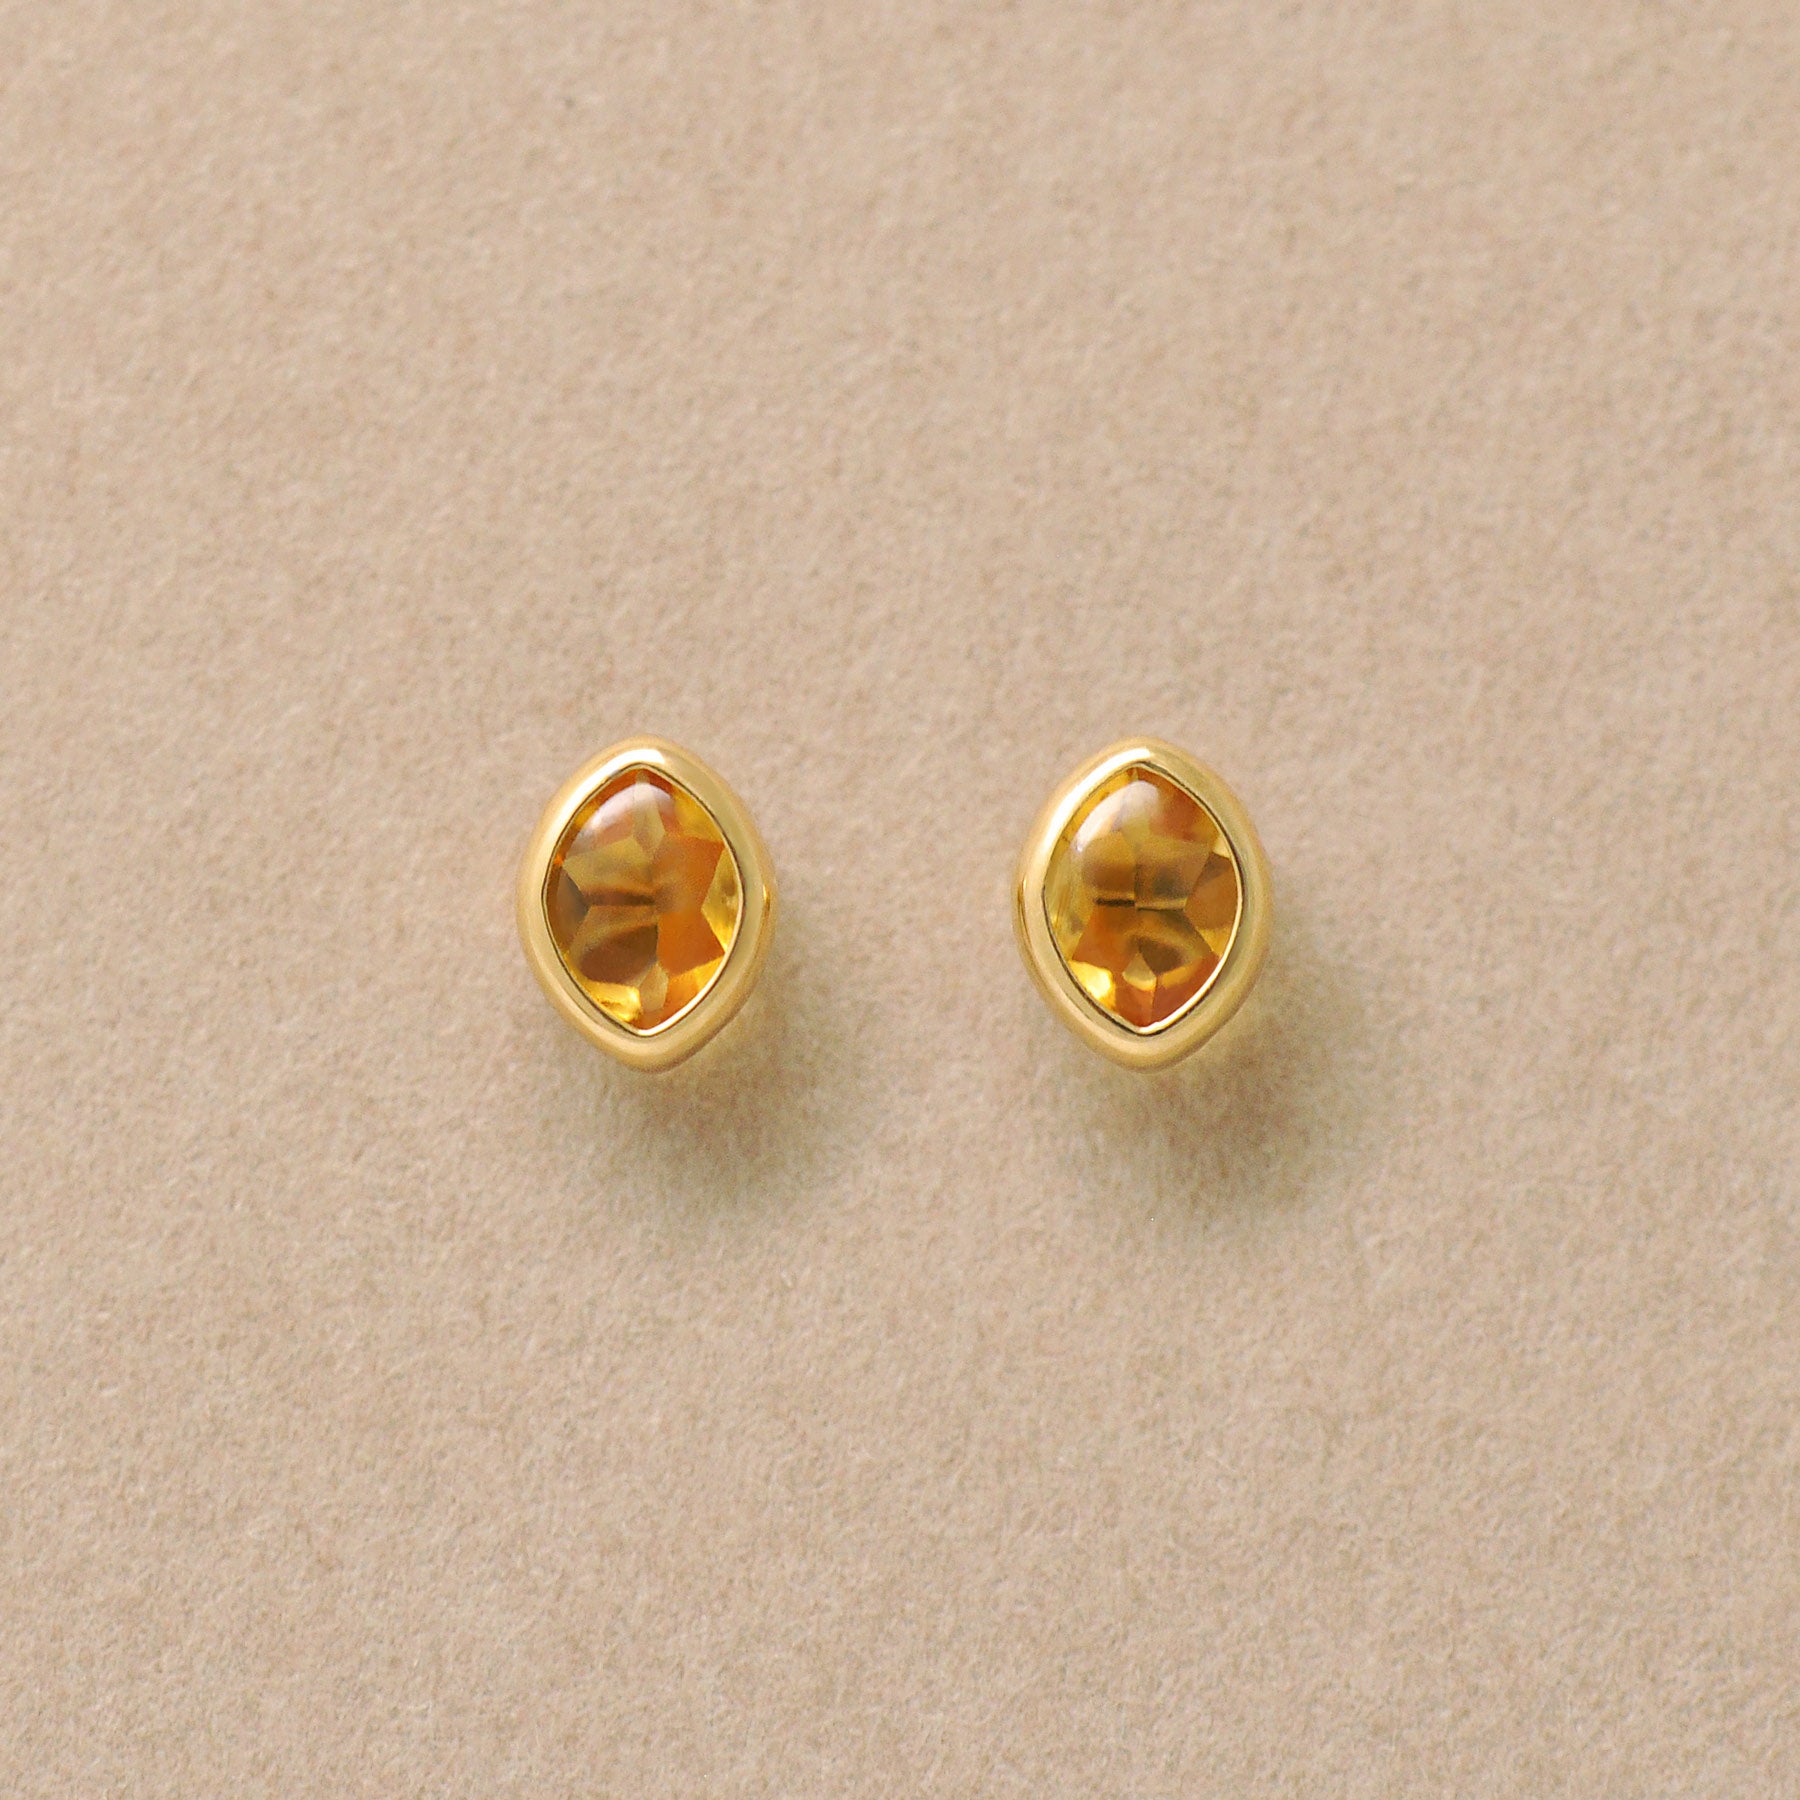 [Second Earrings] 18K Citrine Marquise Earrings (Yellow Gold) - Product Image